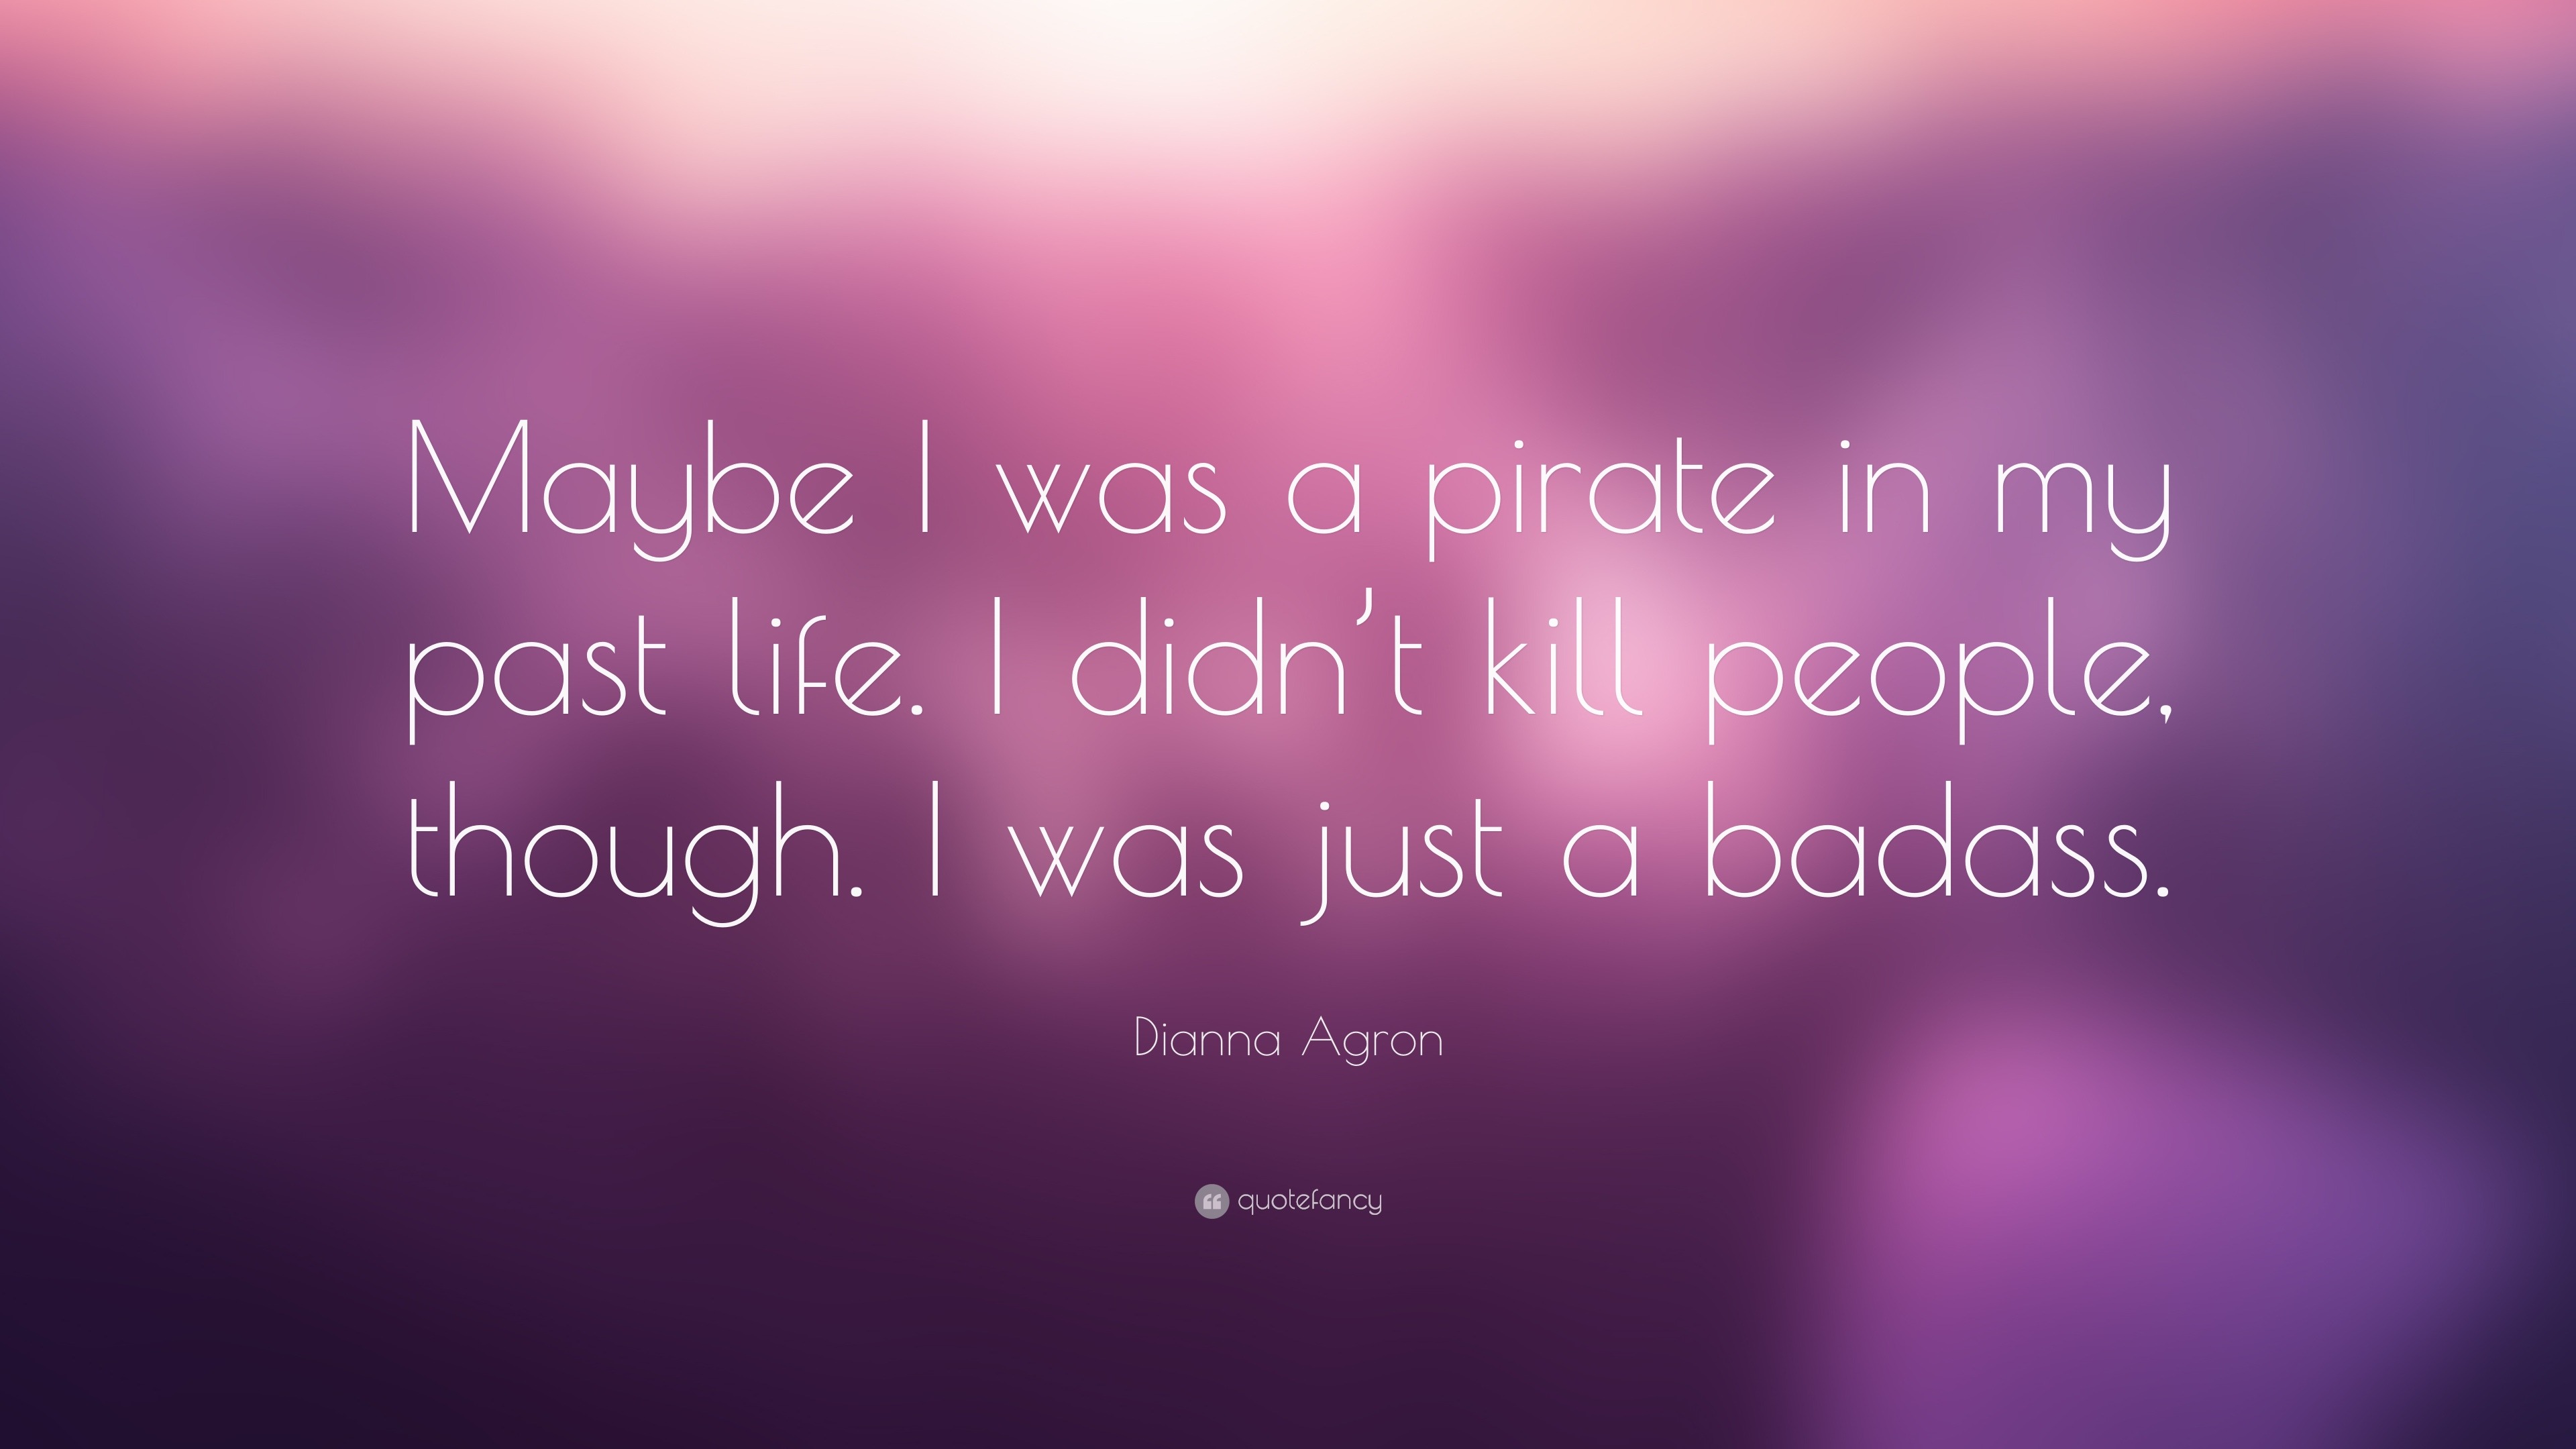 Dianna Agron Quote “Maybe I was a pirate in my past life I